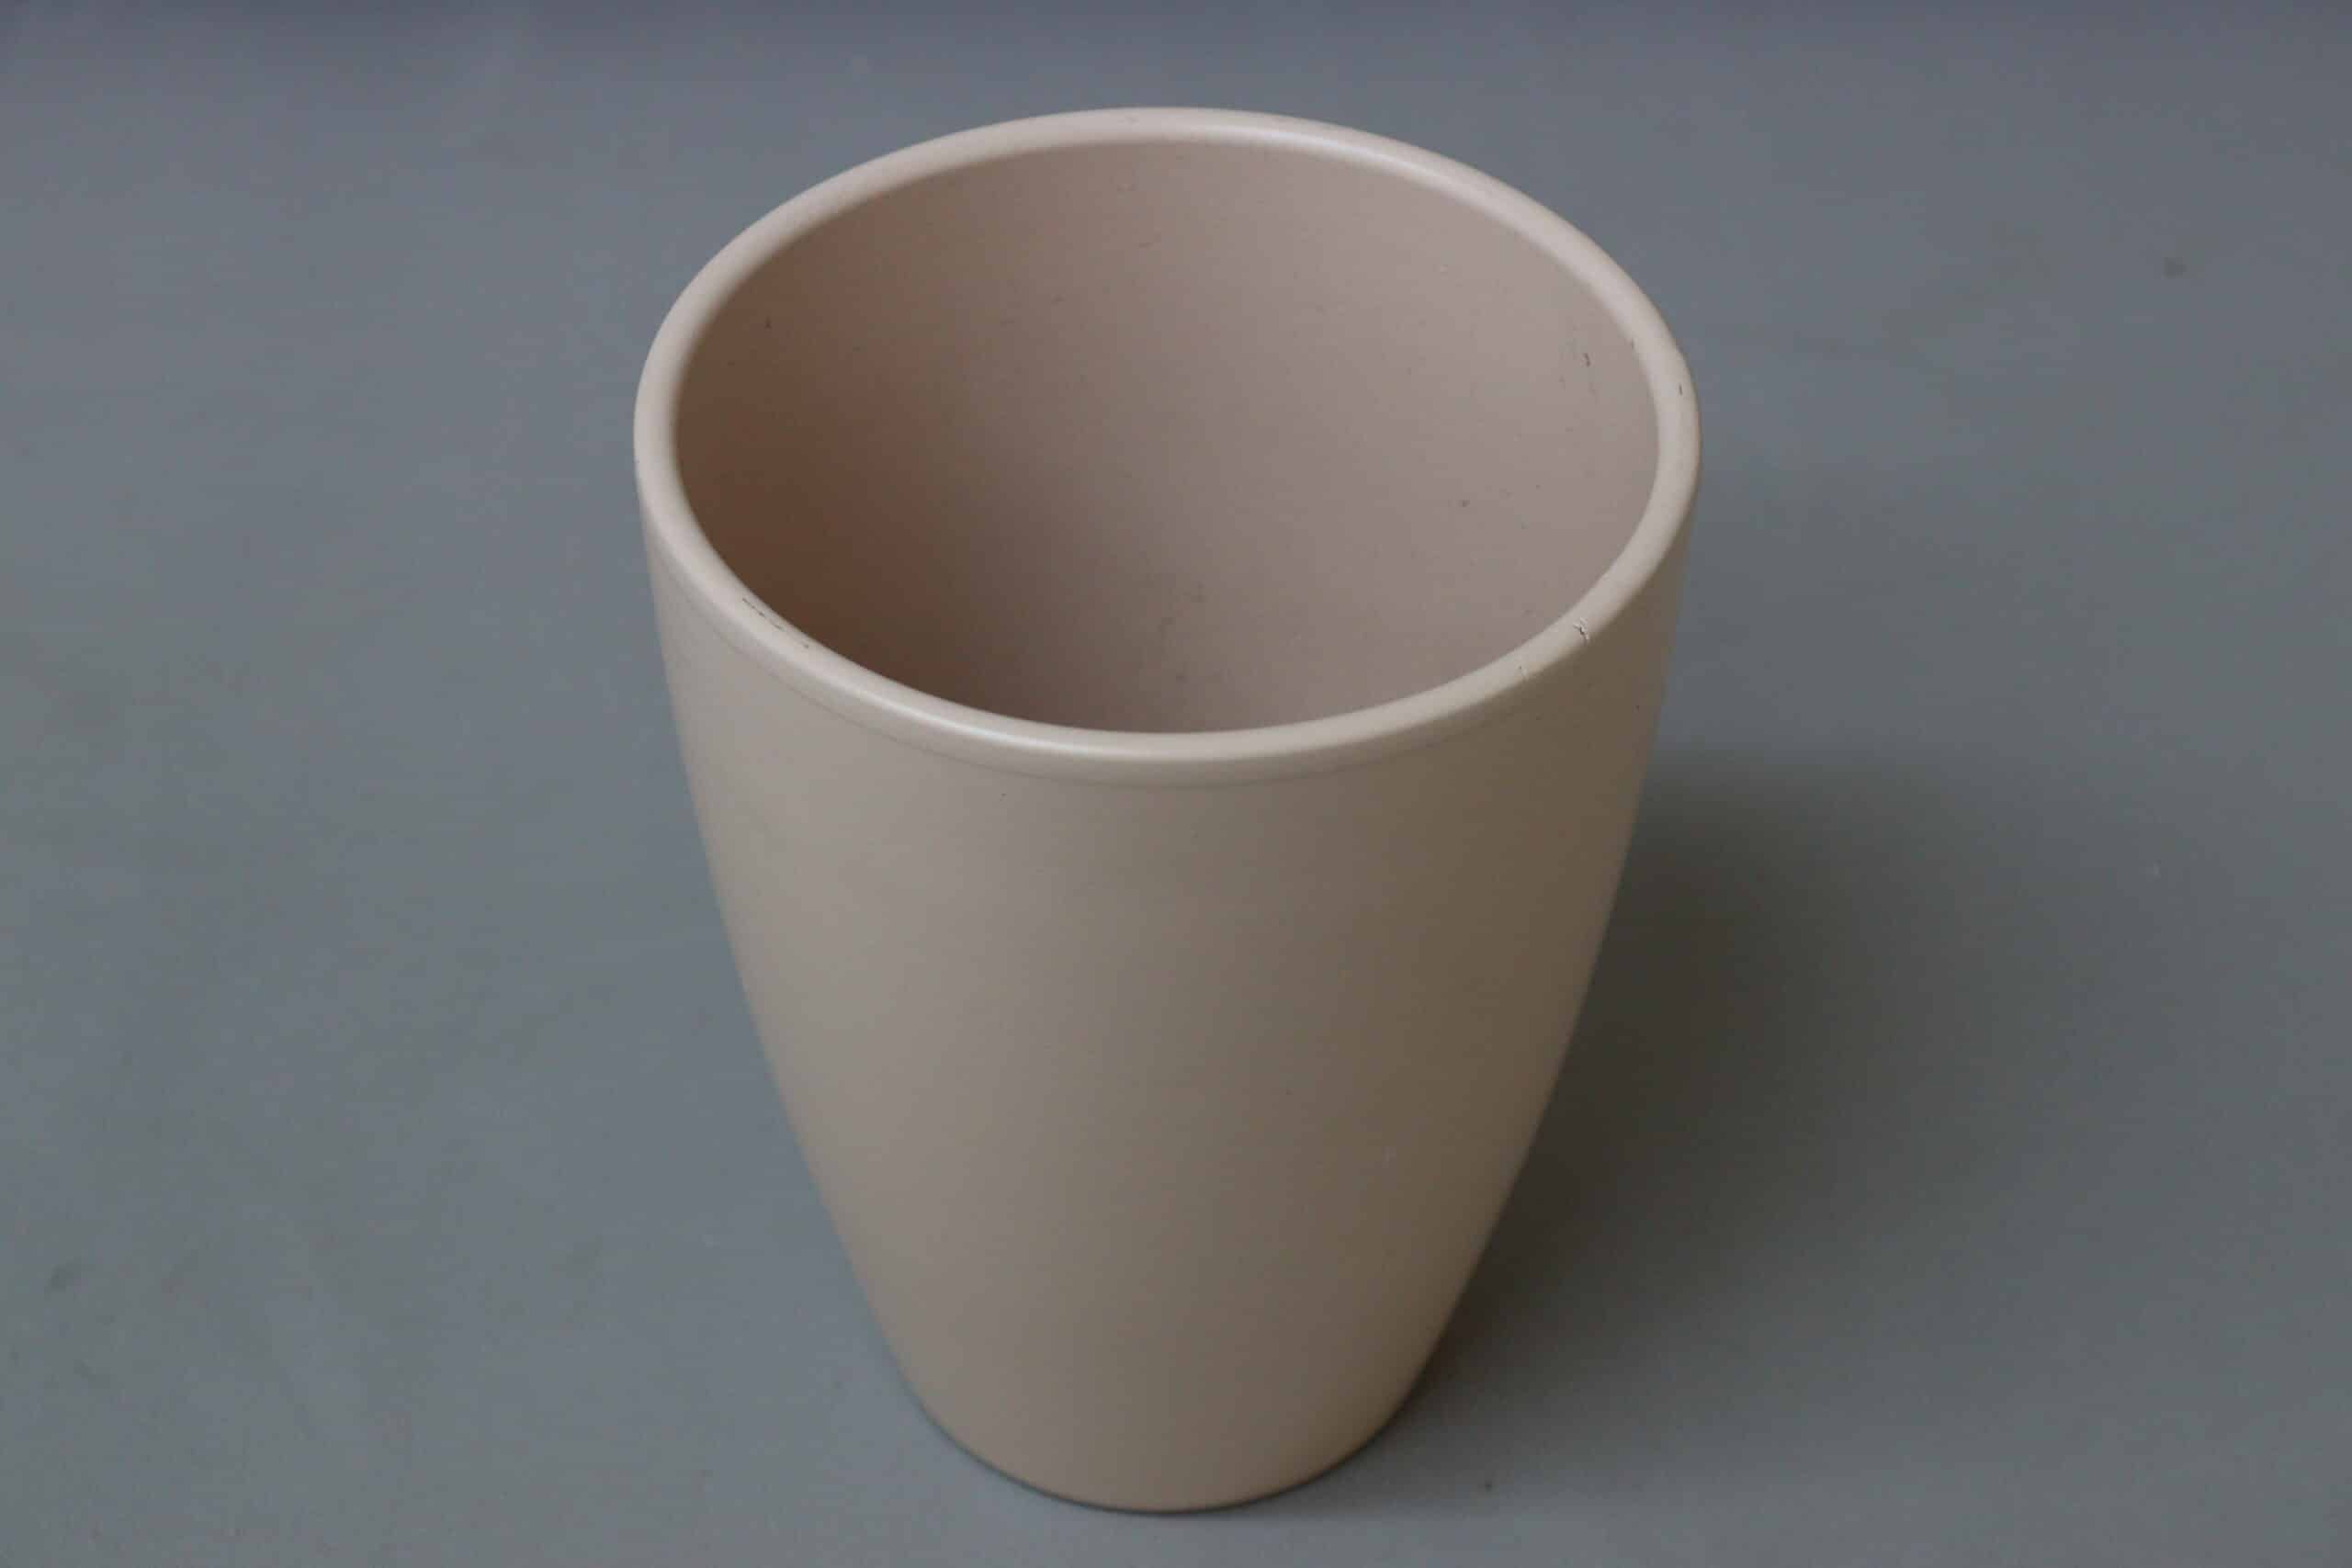 Tall, smooth beige pot cover for potted plants.